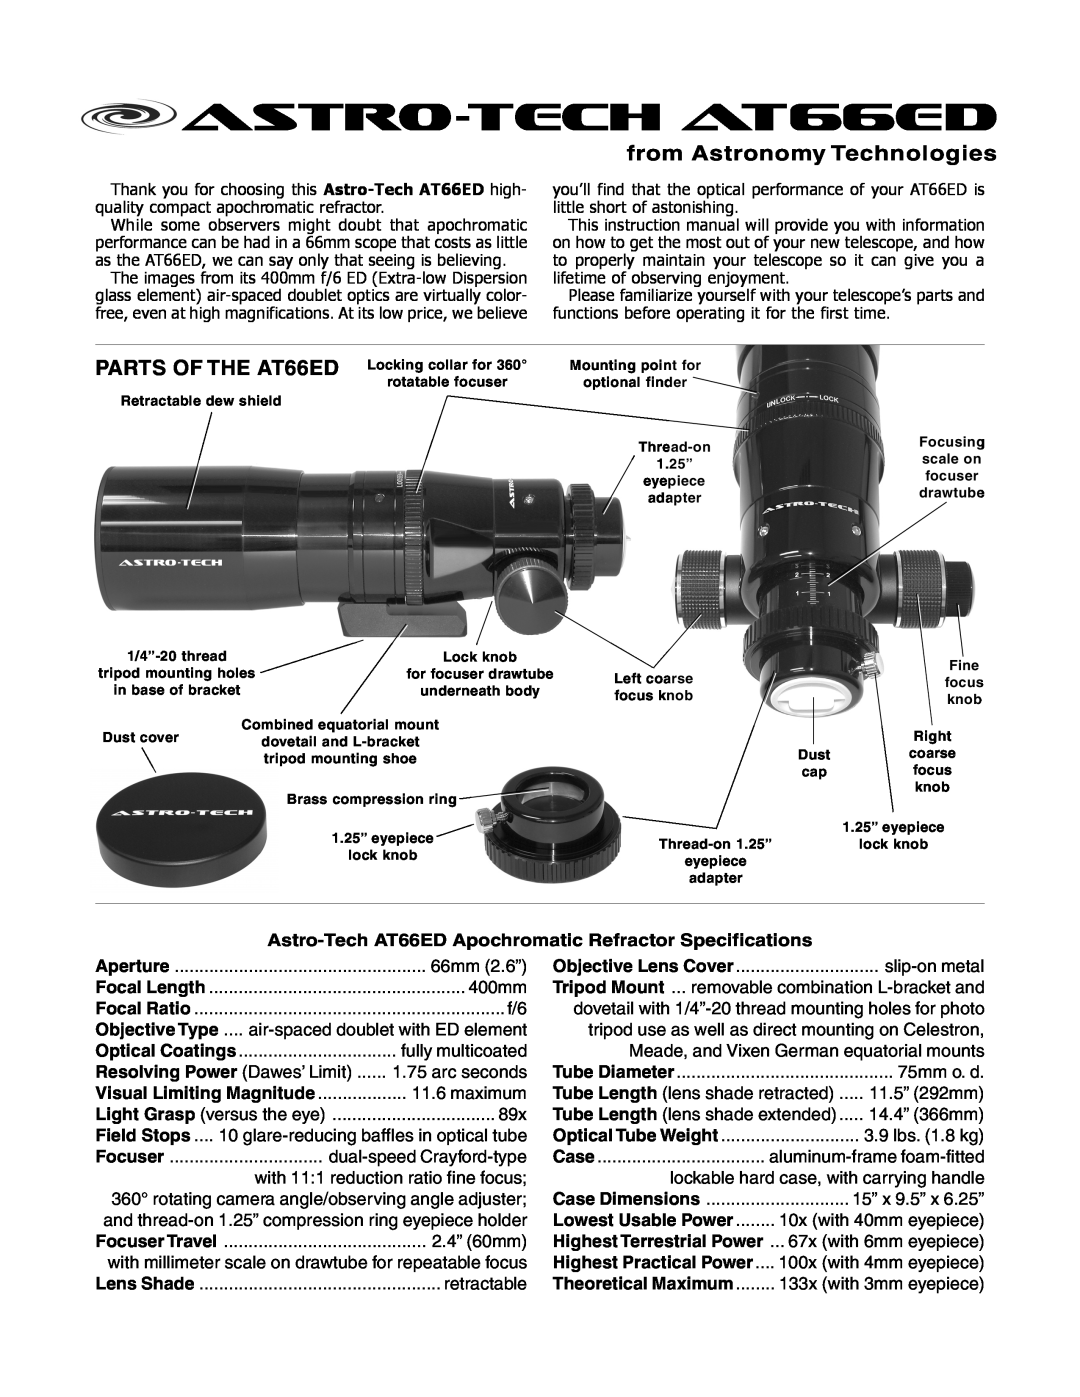 Meade instruction manual Astro-Tech AT66ED Apochromatic Refractor Specifications, Focuser, 2.4” 60mm, retractable 